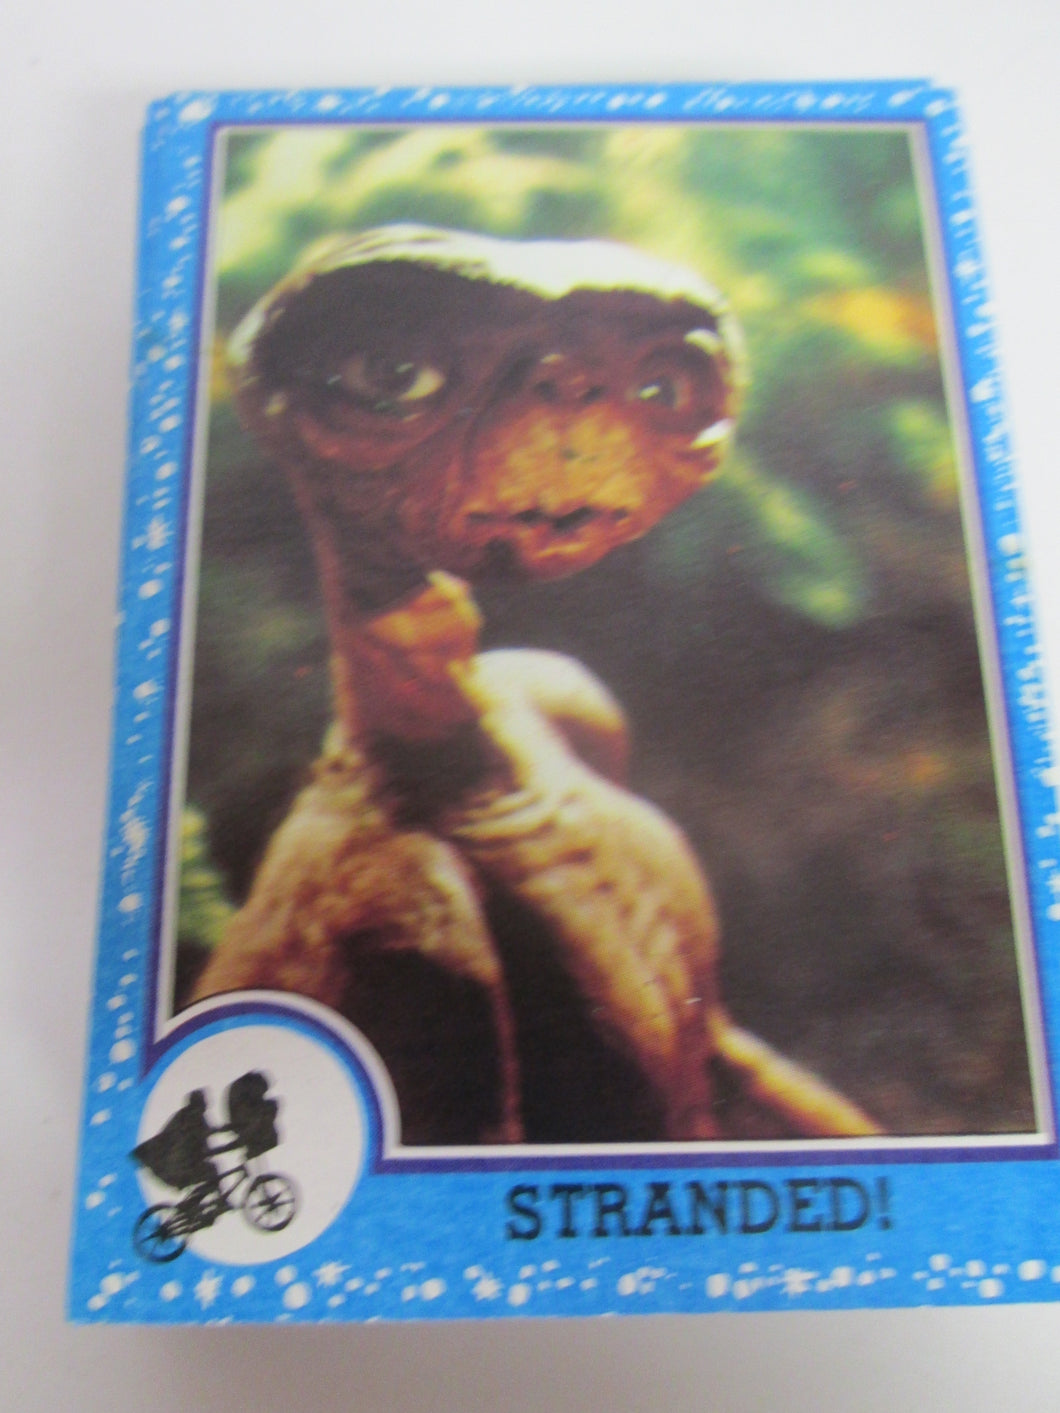 E.T. The Extra-Terrestrial 1982 43 random Cards from an 87 card set